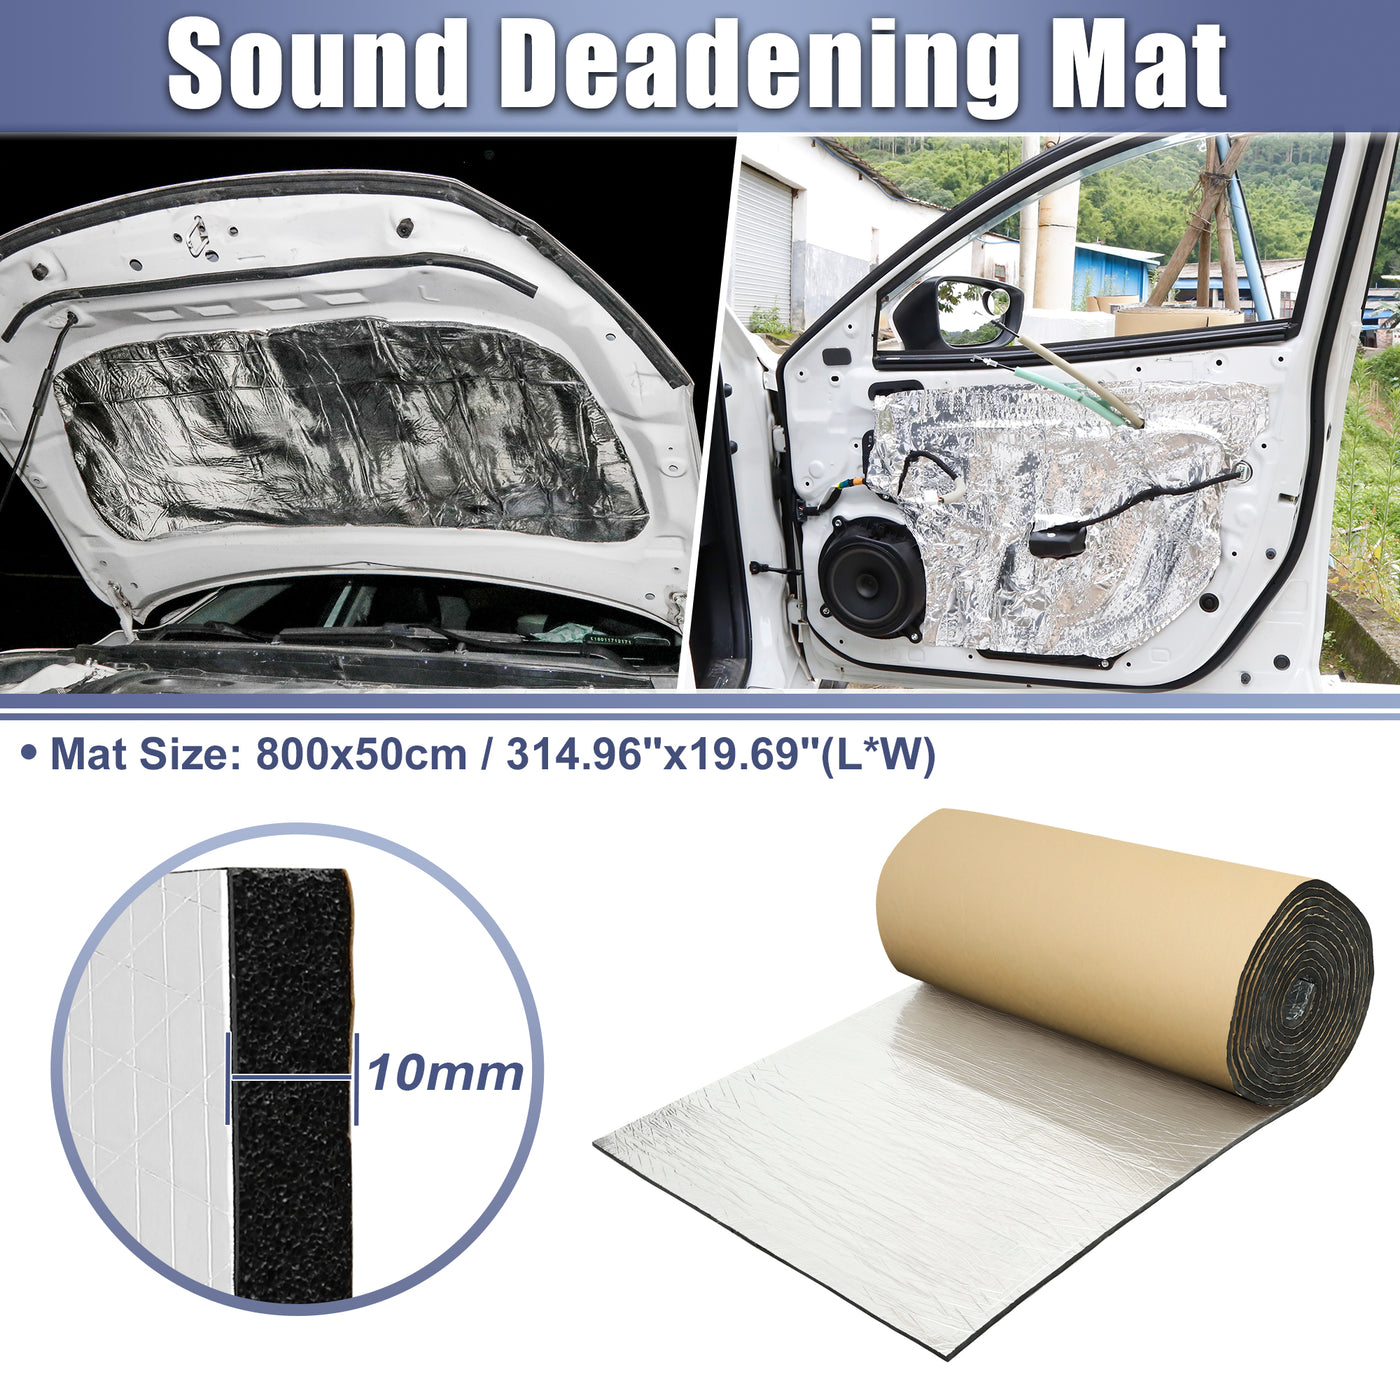 X AUTOHAUX 394mil 10mm 43.05sqft Car Sound Deadening Mat Aluminum Foil Closed Cell Foam Heat Shield Material Self Adhesive Universal for Hood Fender and Boat Engine Cover 314.96"x19.69"